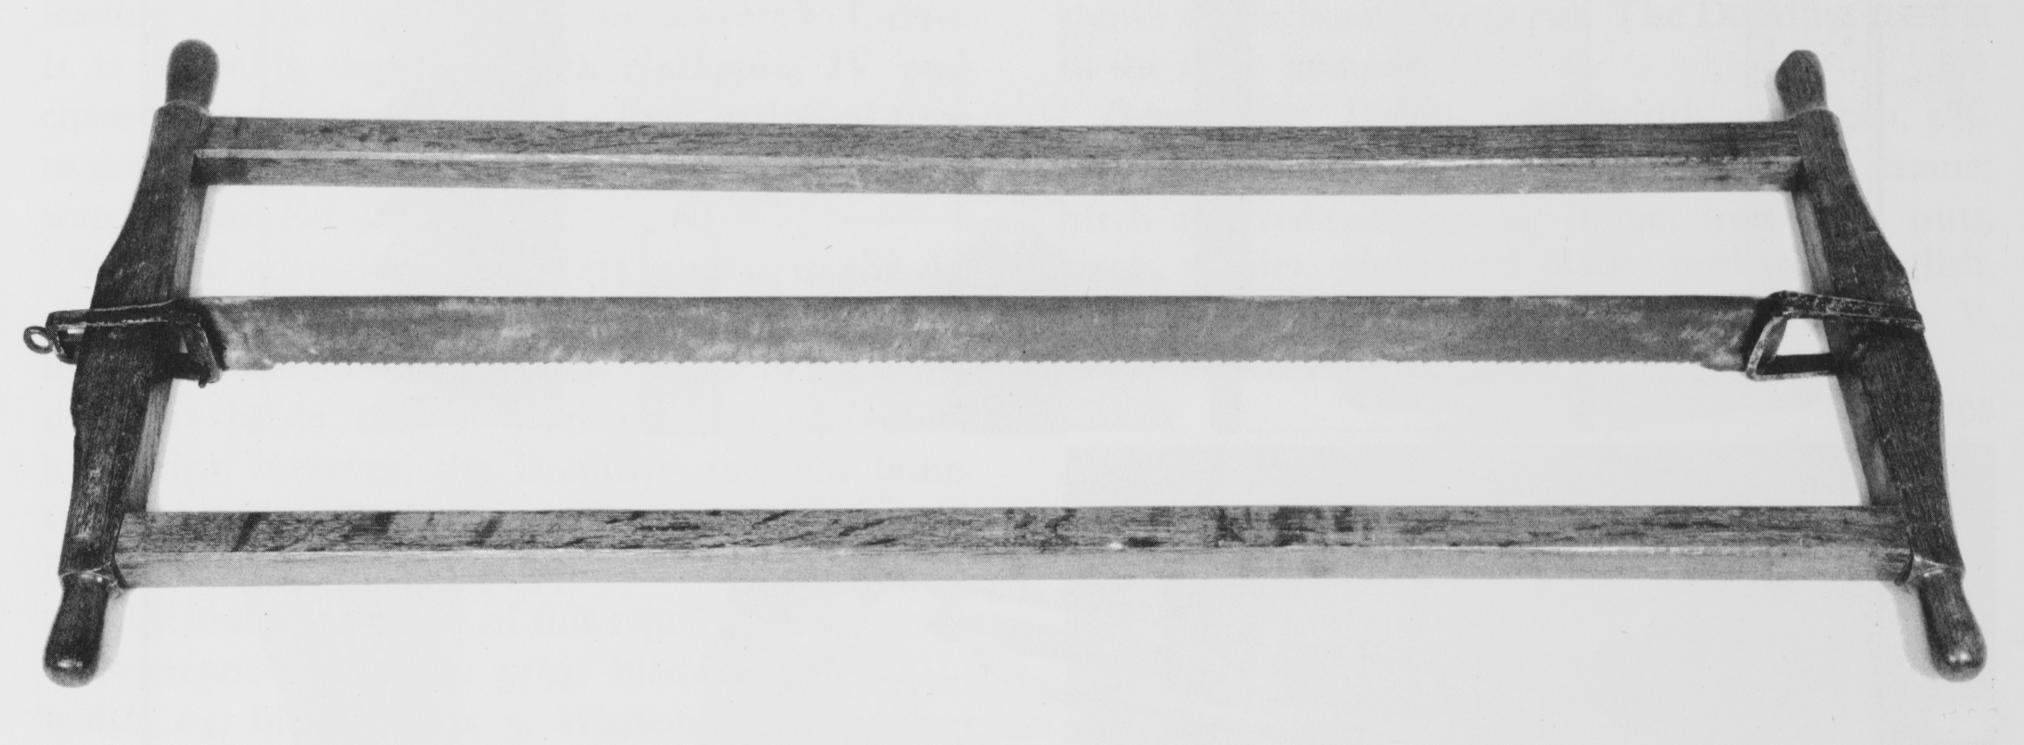 Black and white photograph of a frame or veneer saw.